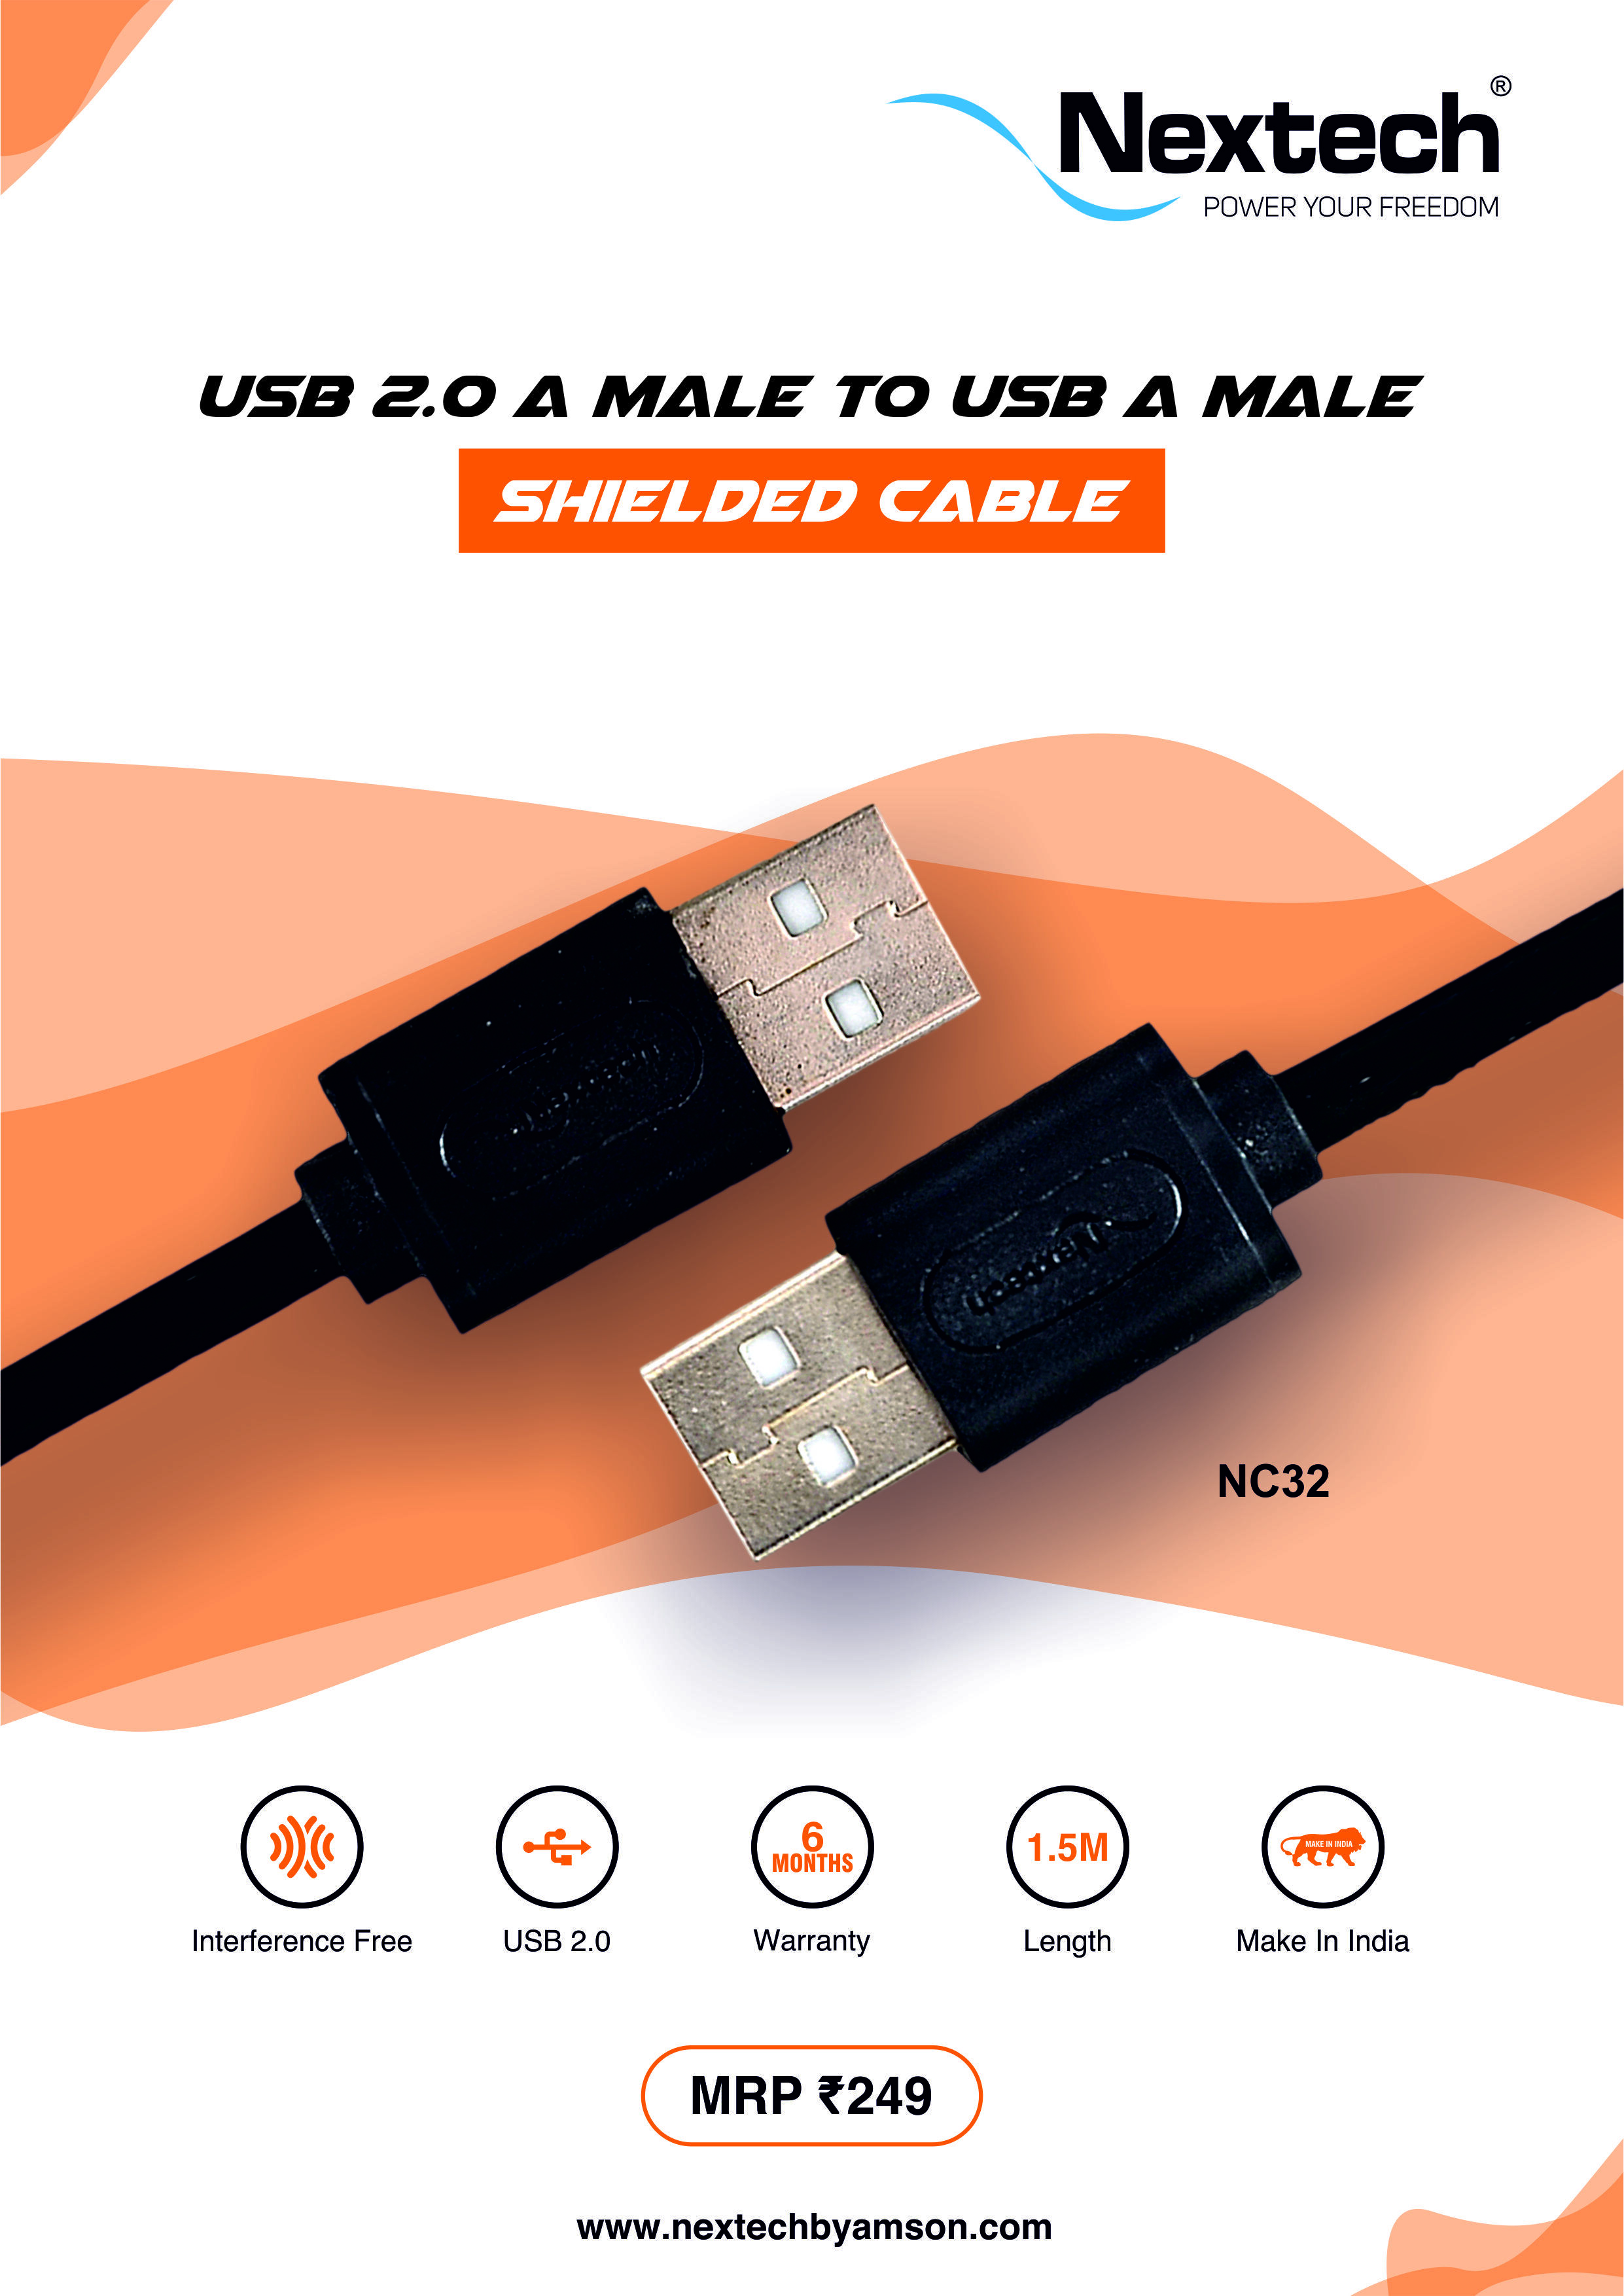 Nextech NC32 USB 2.0 (M) TO USB (M) SHIELDED CABLE 1.5 m